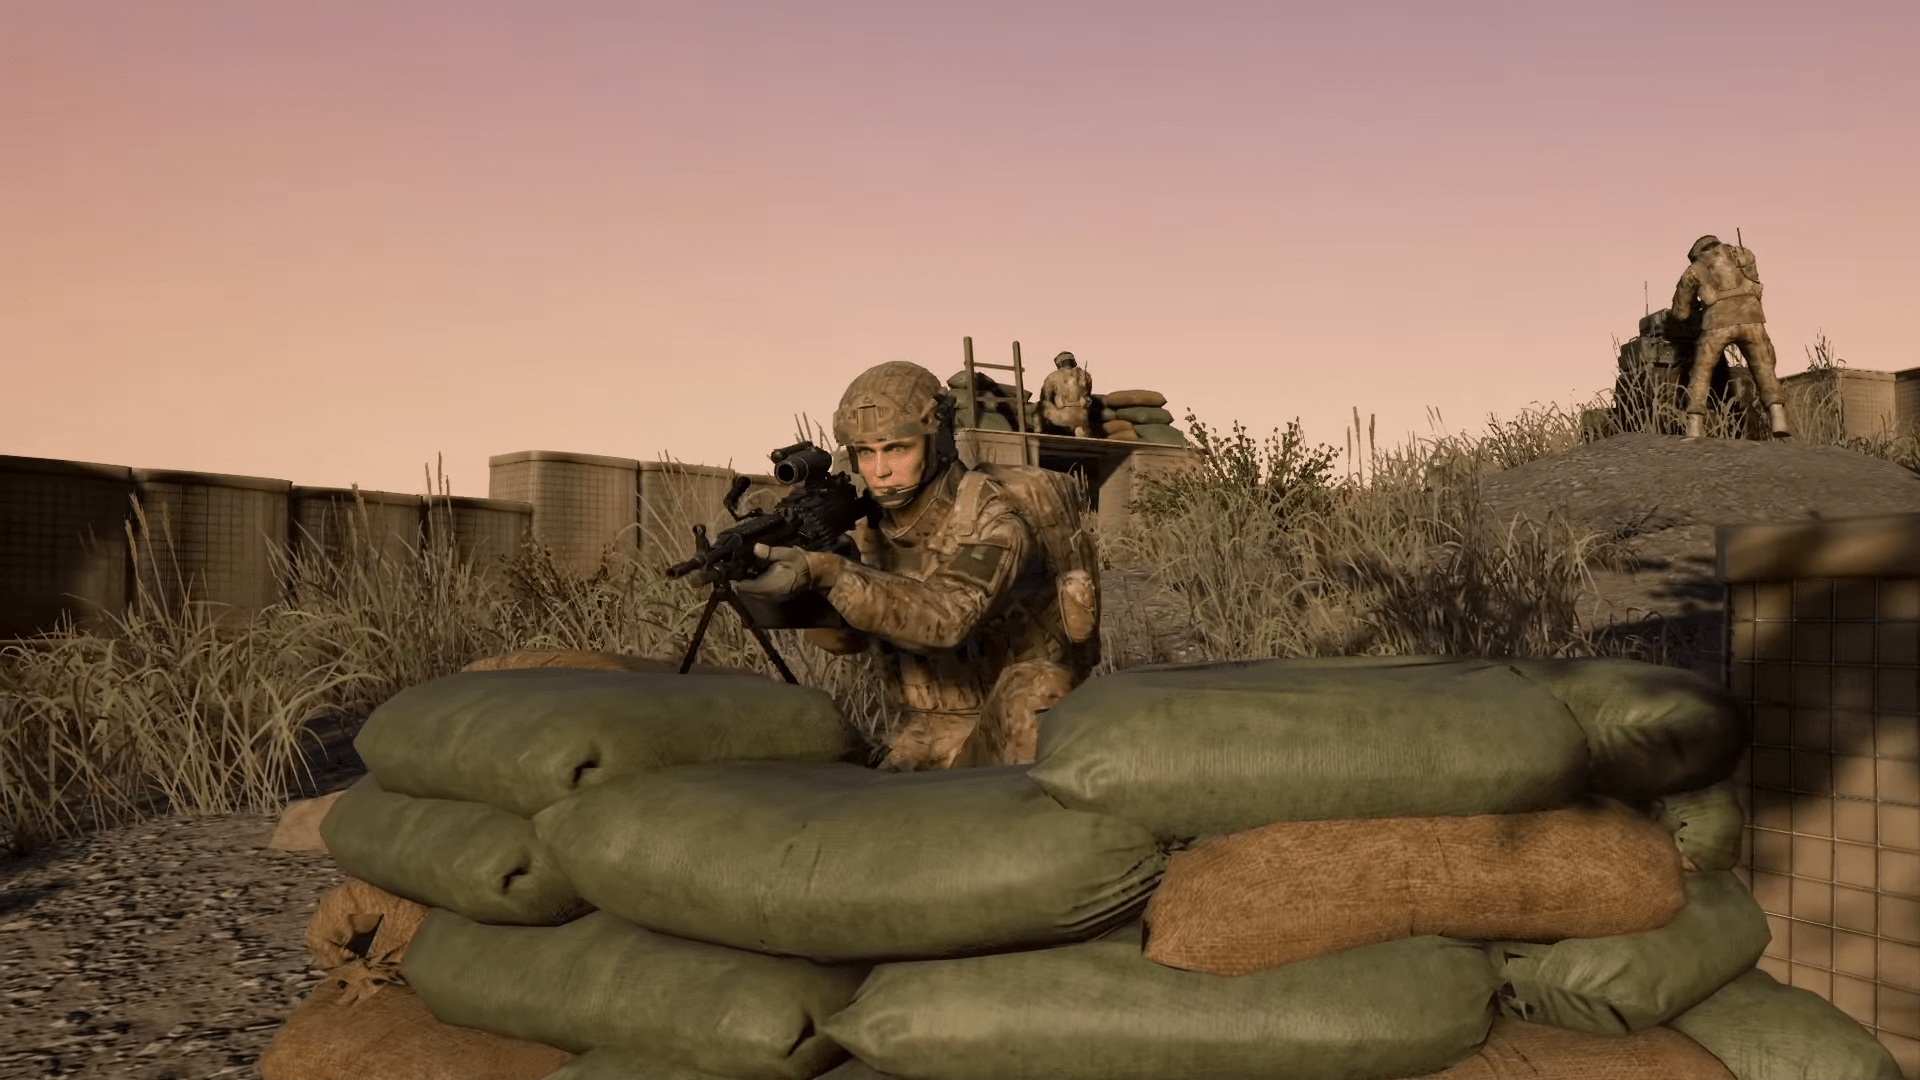 ‘Squad’ Is Free To Play All Weekend On Steam, Featuring Realistic Military Combat